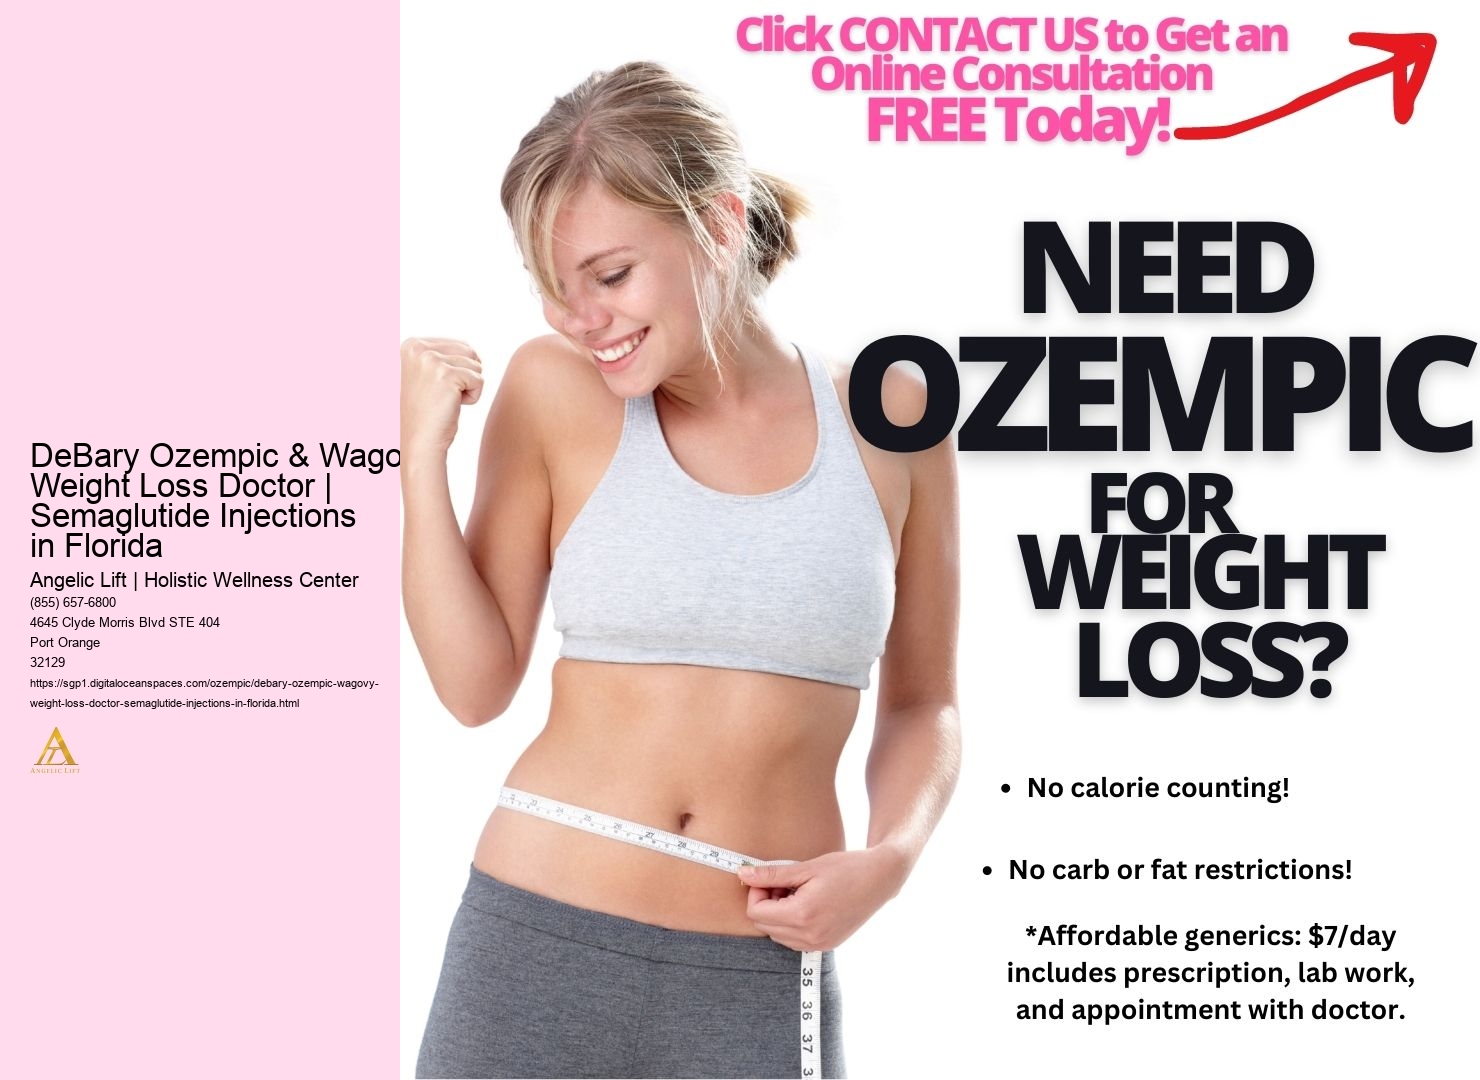 DeBary Ozempic & Wagovy Weight Loss Doctor | Semaglutide Injections in Florida